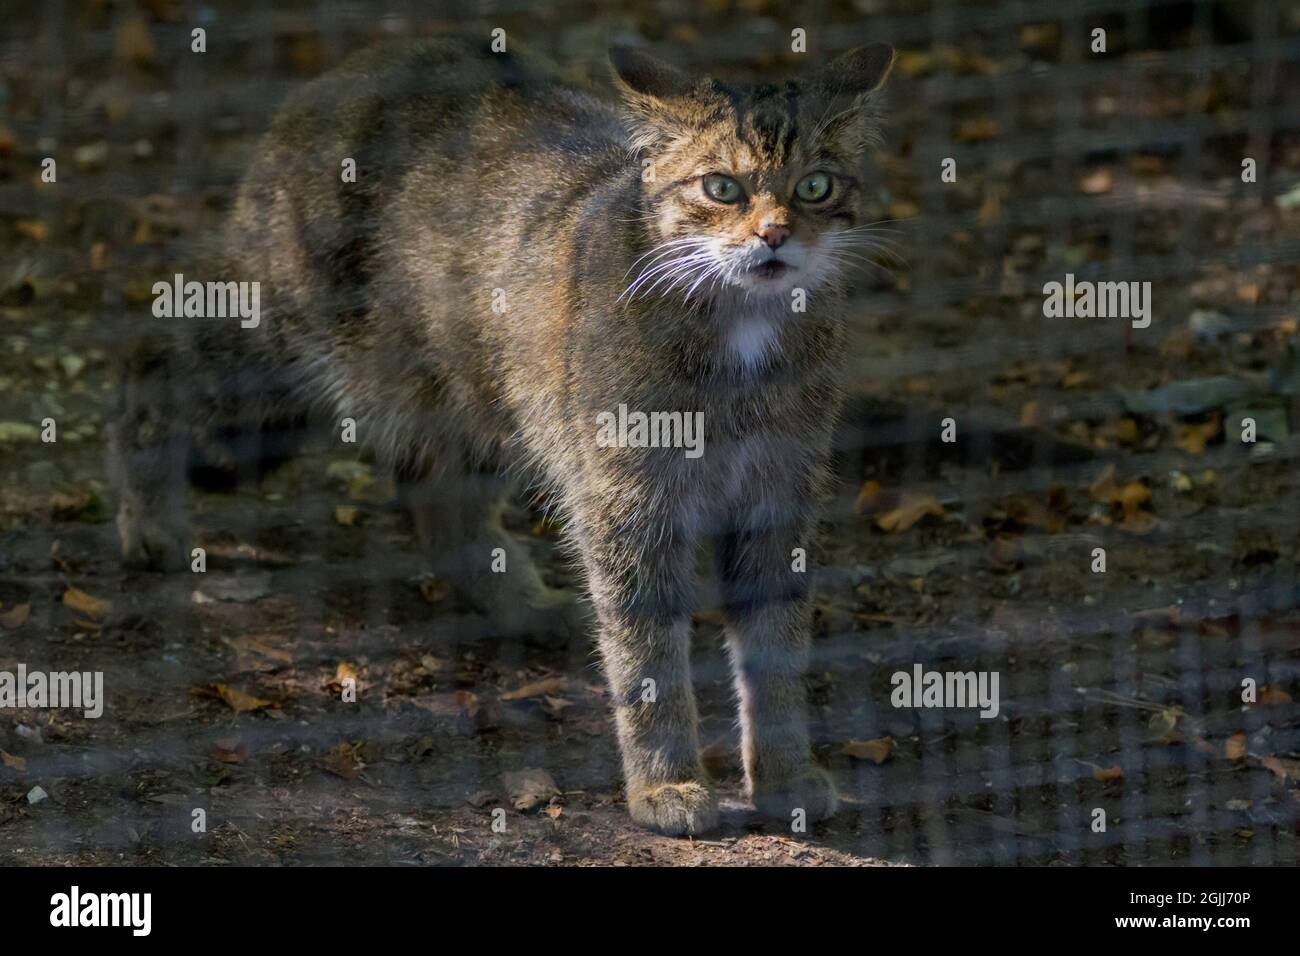 Scottish wildcat (Felix sylvestris) captive similar to tabby cat with large bushy blunt ended tail with dark rings, body also has dark stripe markings Stock Photo